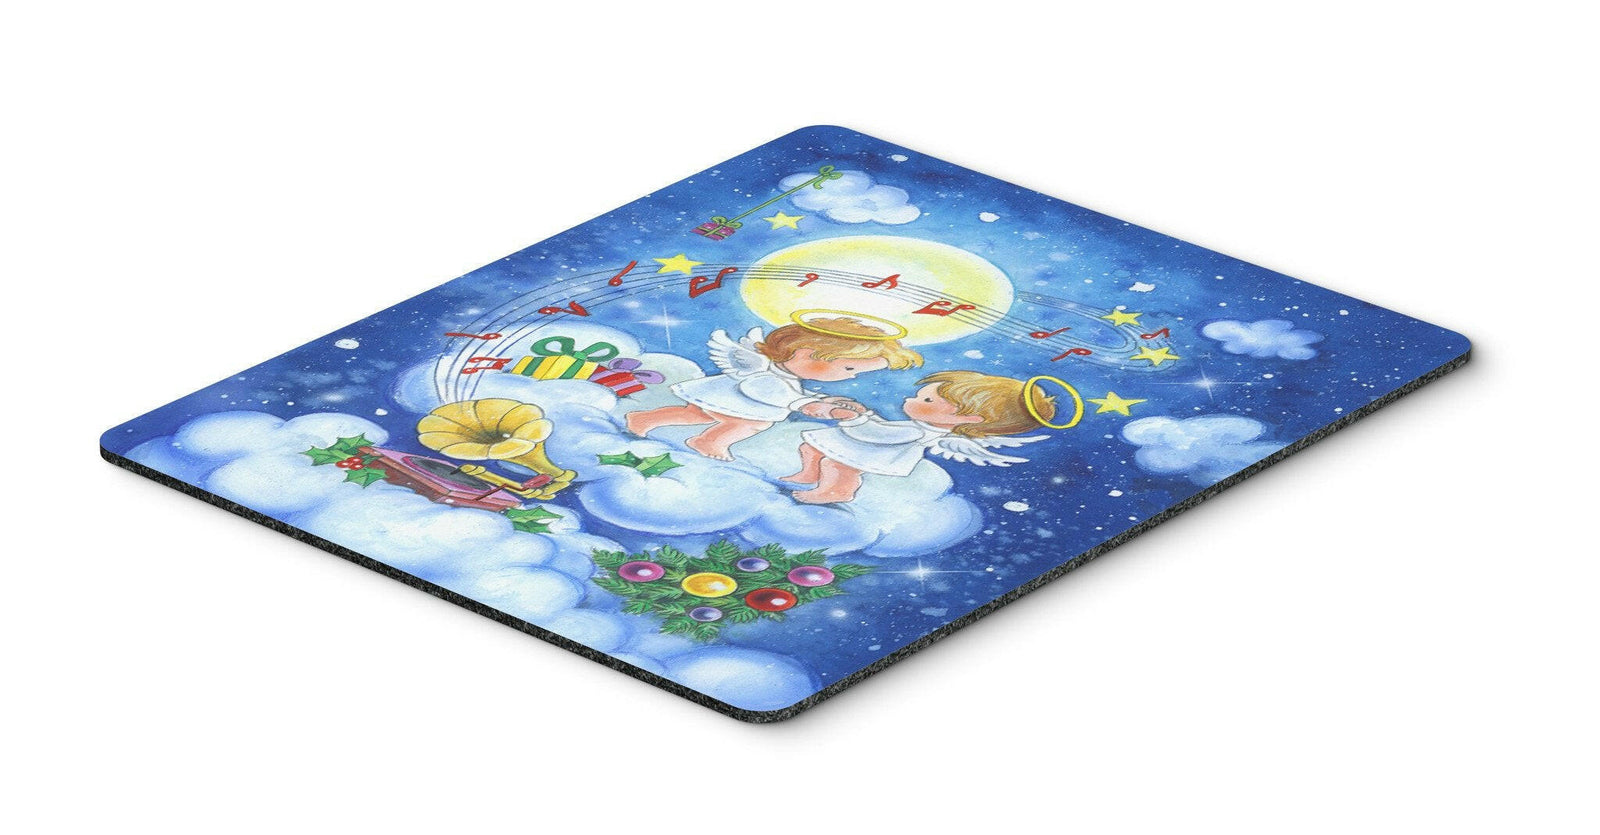 Angels Making Music Together Mouse Pad, Hot Pad or Trivet APH3790MP by Caroline's Treasures